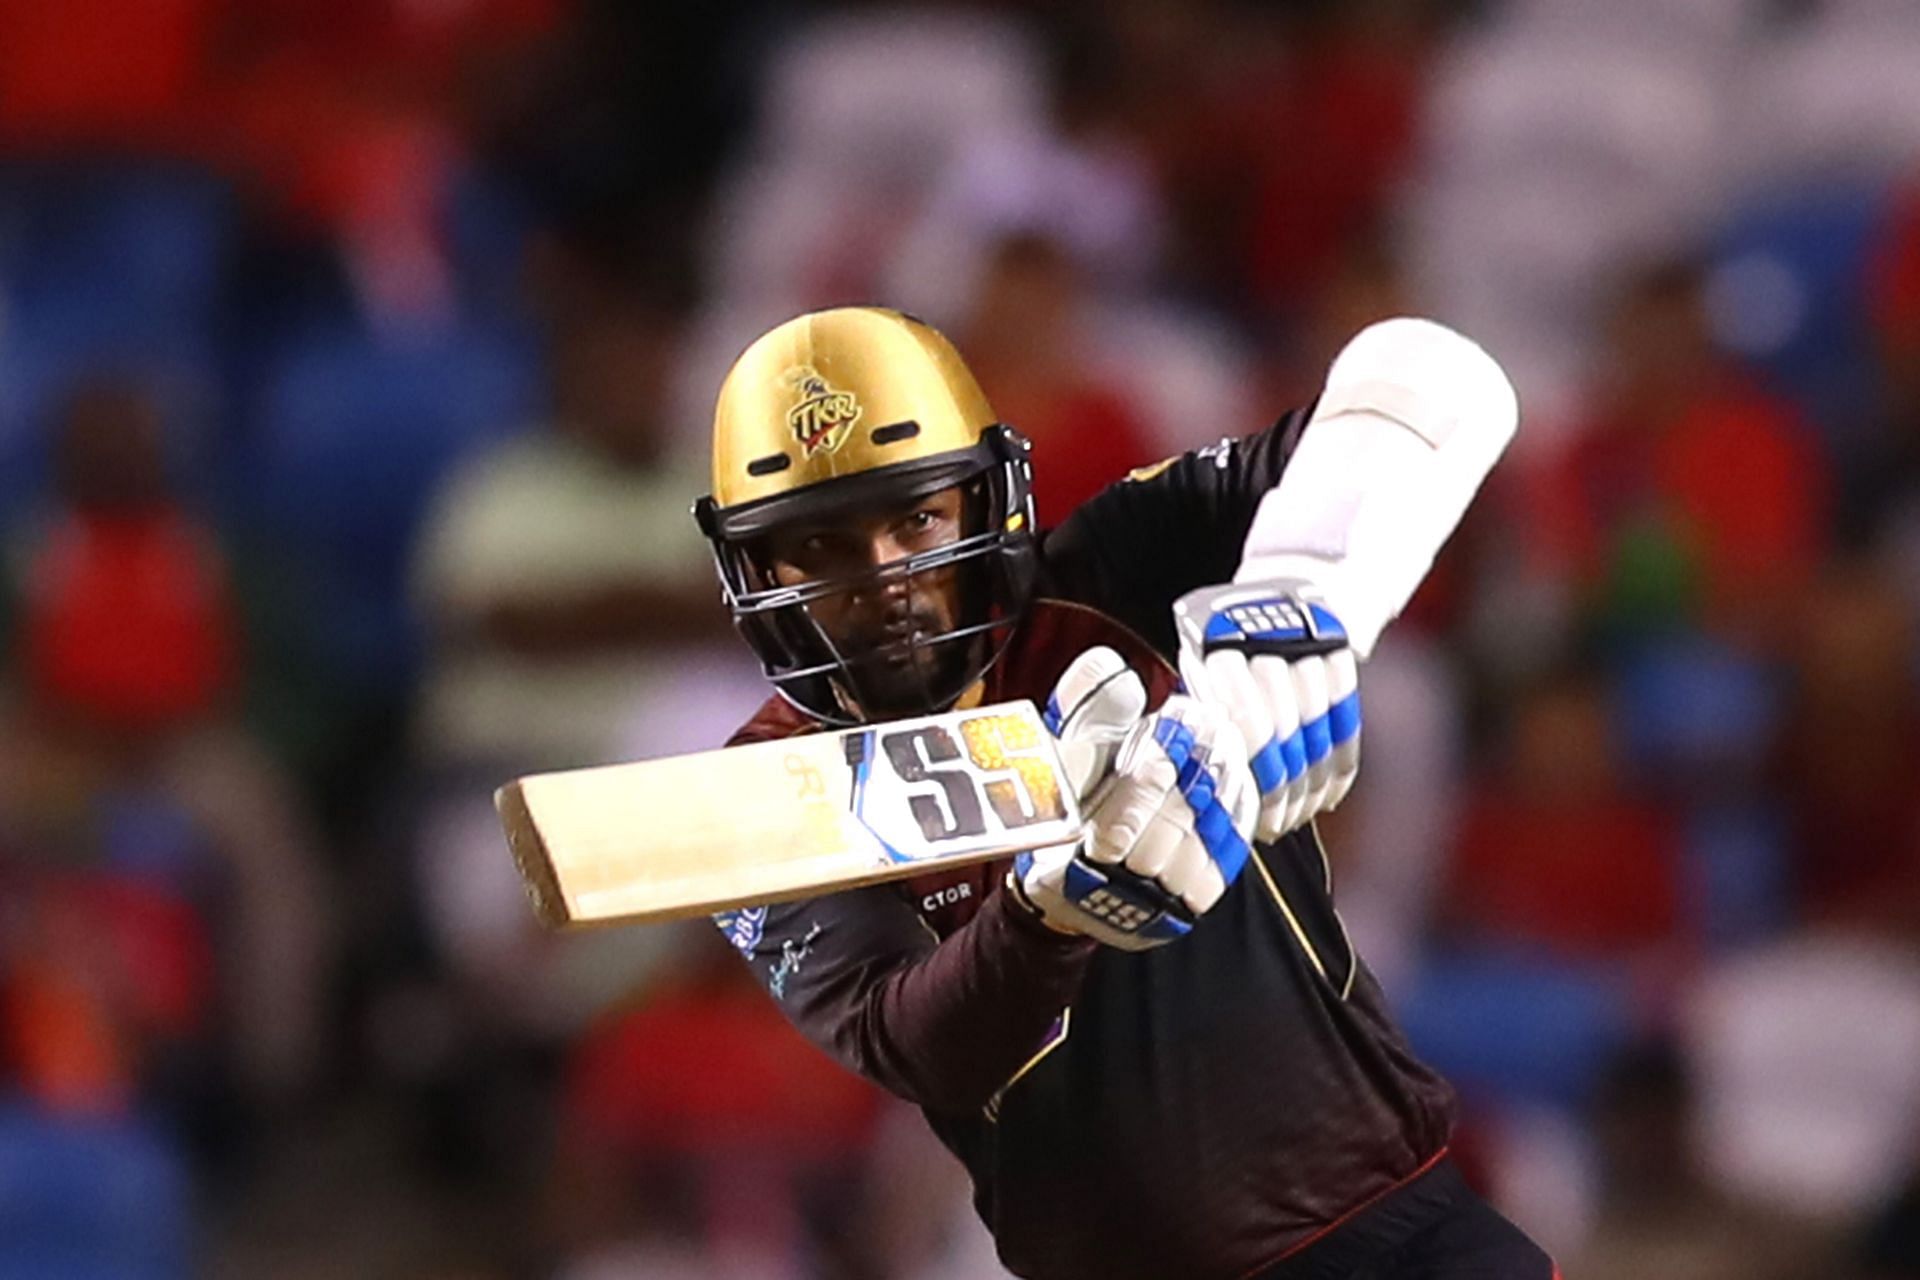 Denesh Ramdin could prove to be an important player for his side